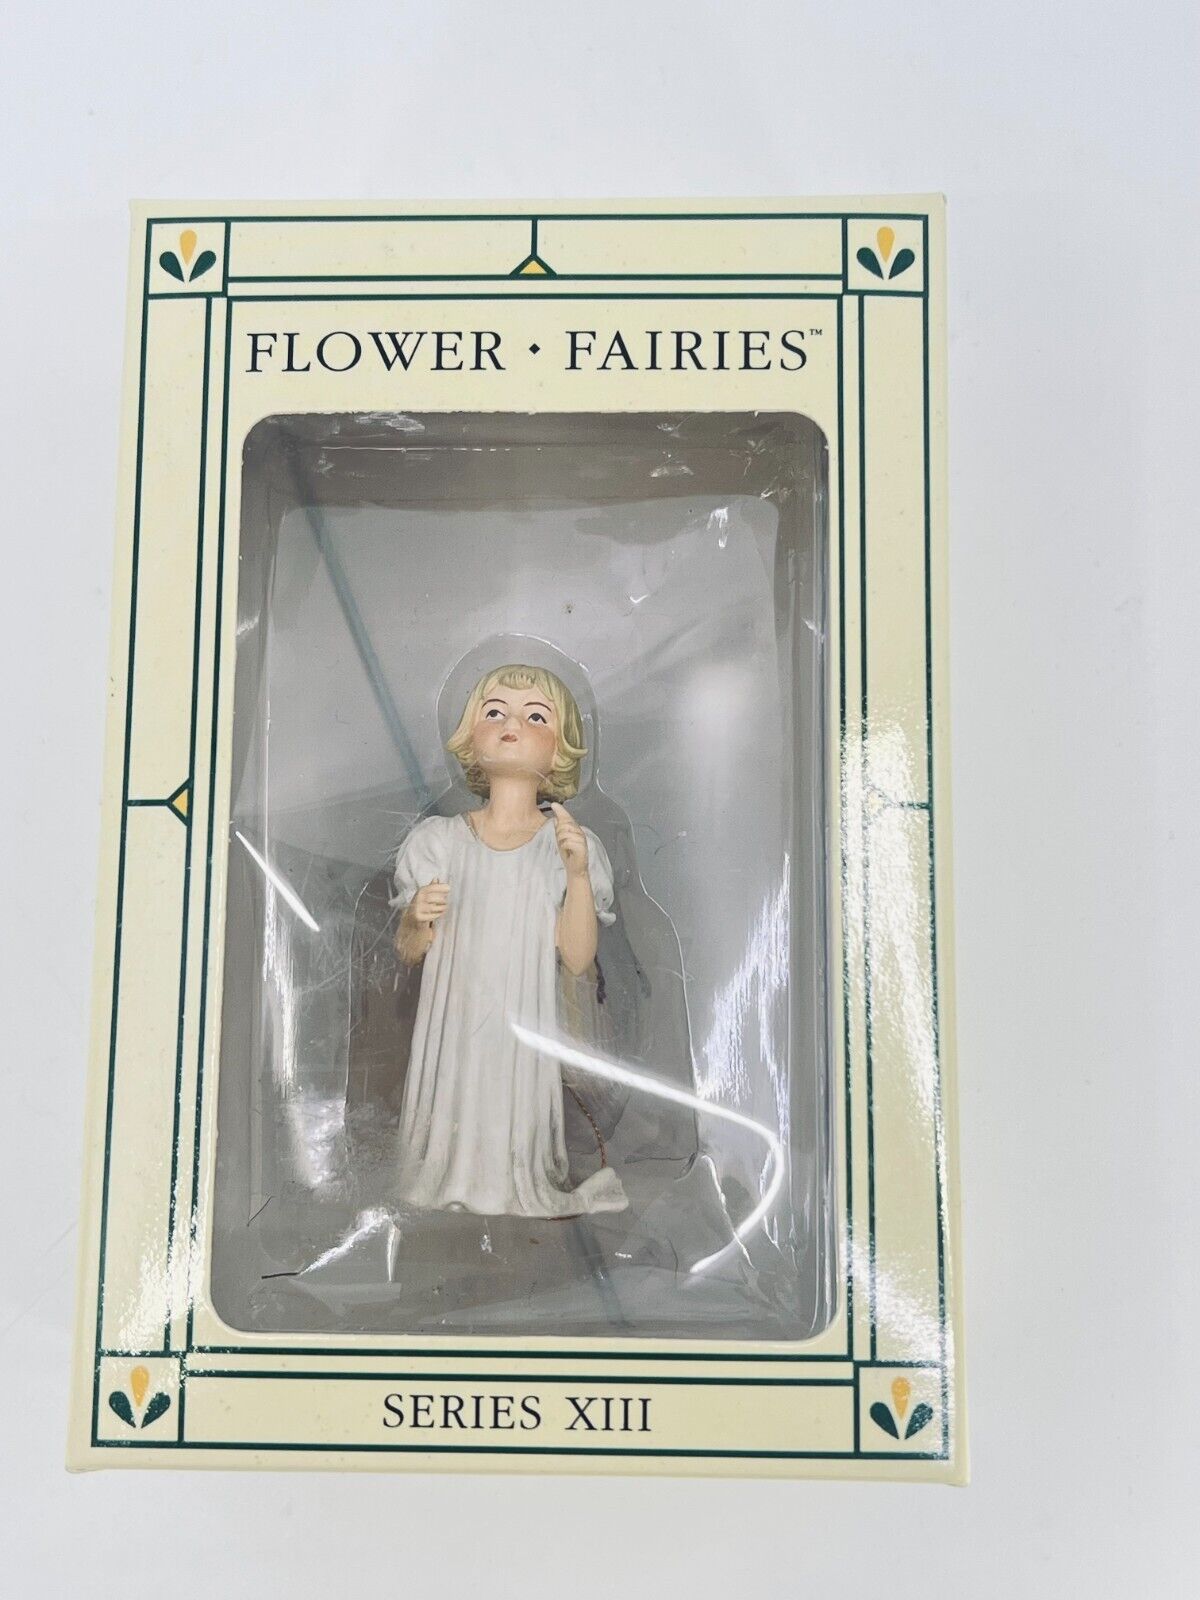 FLOWER FAIRIES SERIES 13 THE LILY OF THE VALLEY FAIRY #86977 Ornament - Sealed